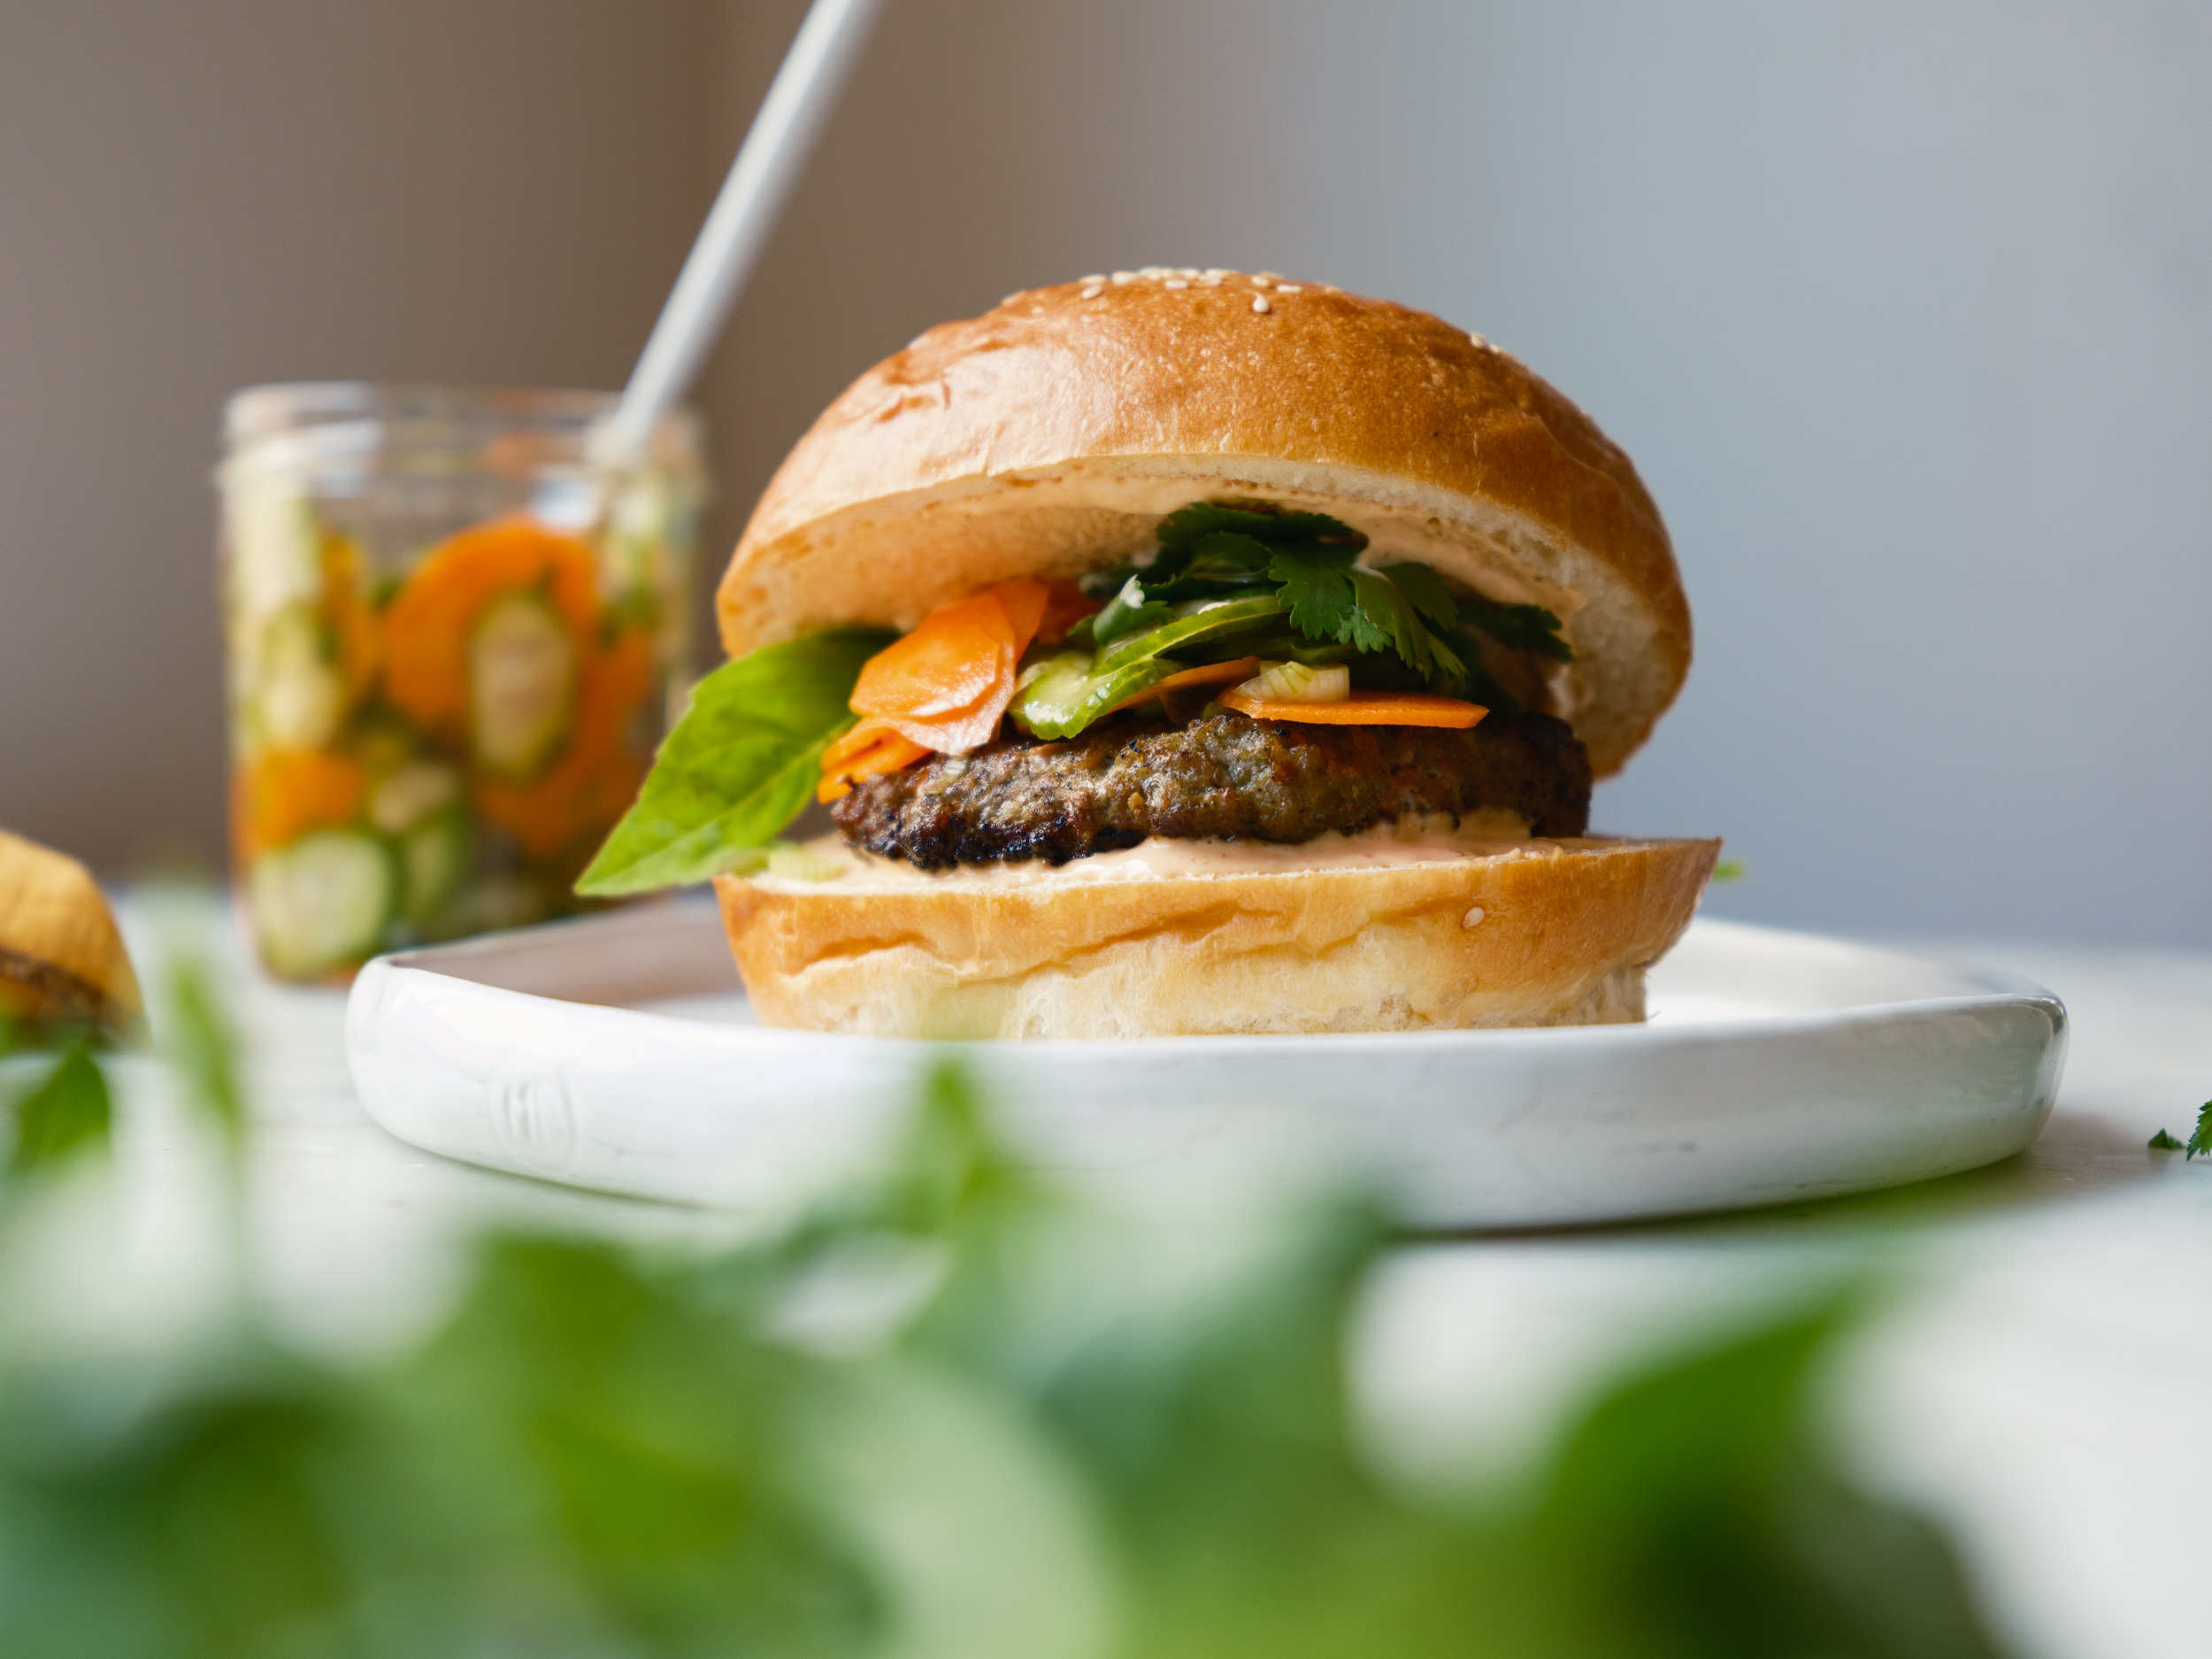 Cook Banh Mi Burgers with Veal, Discover Delicious